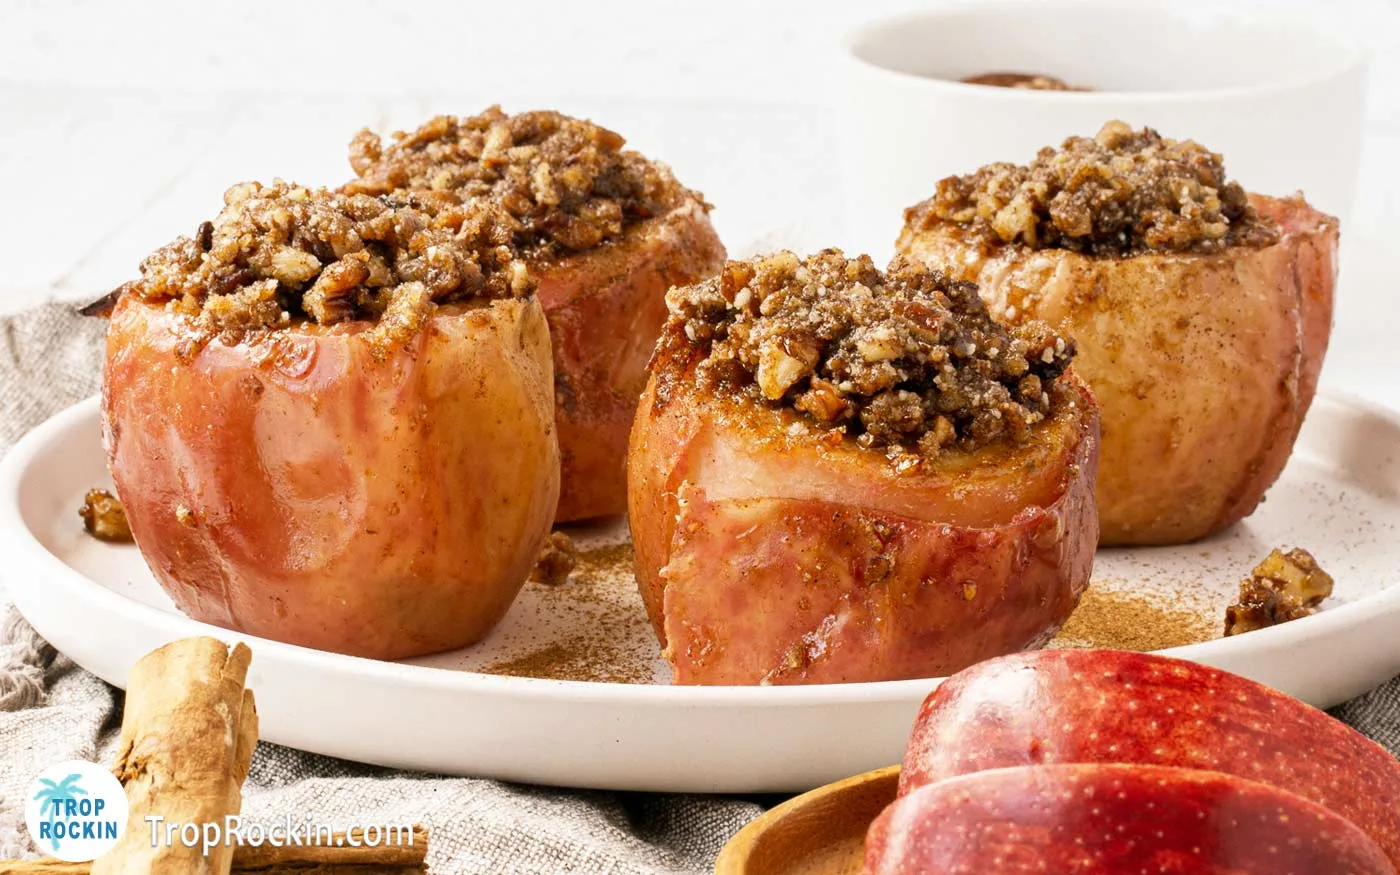 Air fryer baked apples with pecan crumble stuffing on a plate.